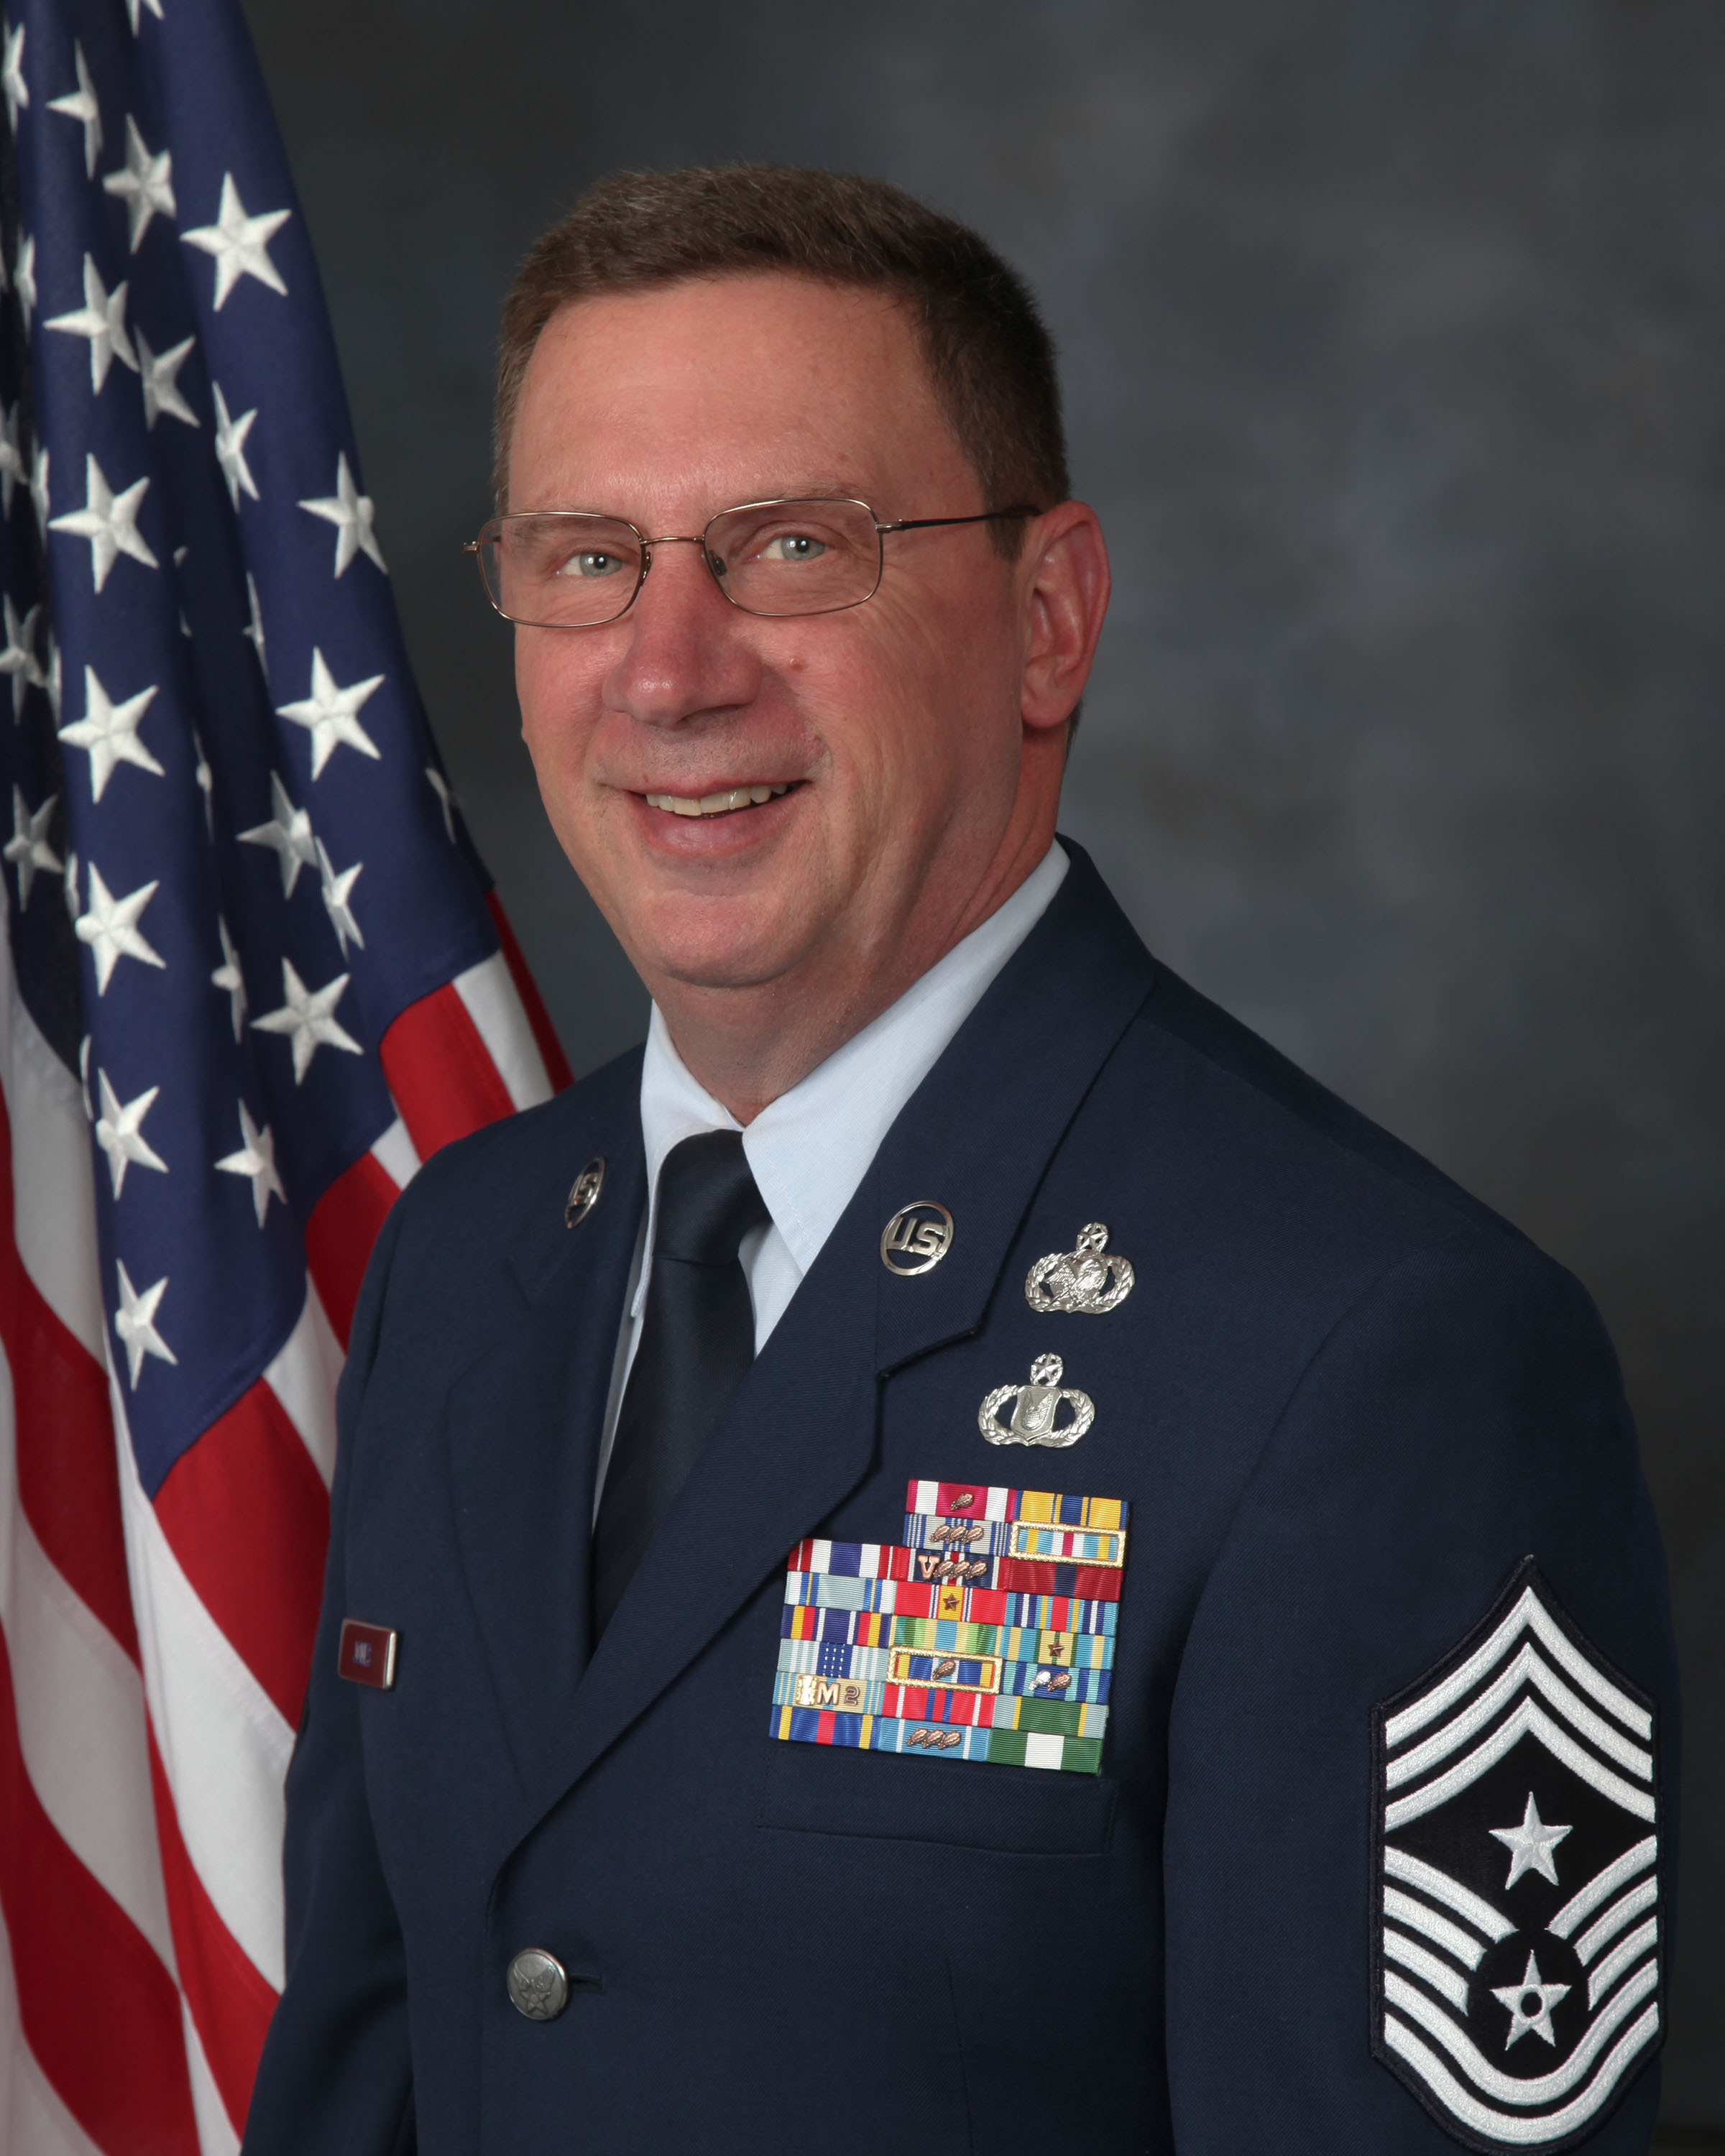 Official photo of Chief Master Sergeant Thomas A. Jones